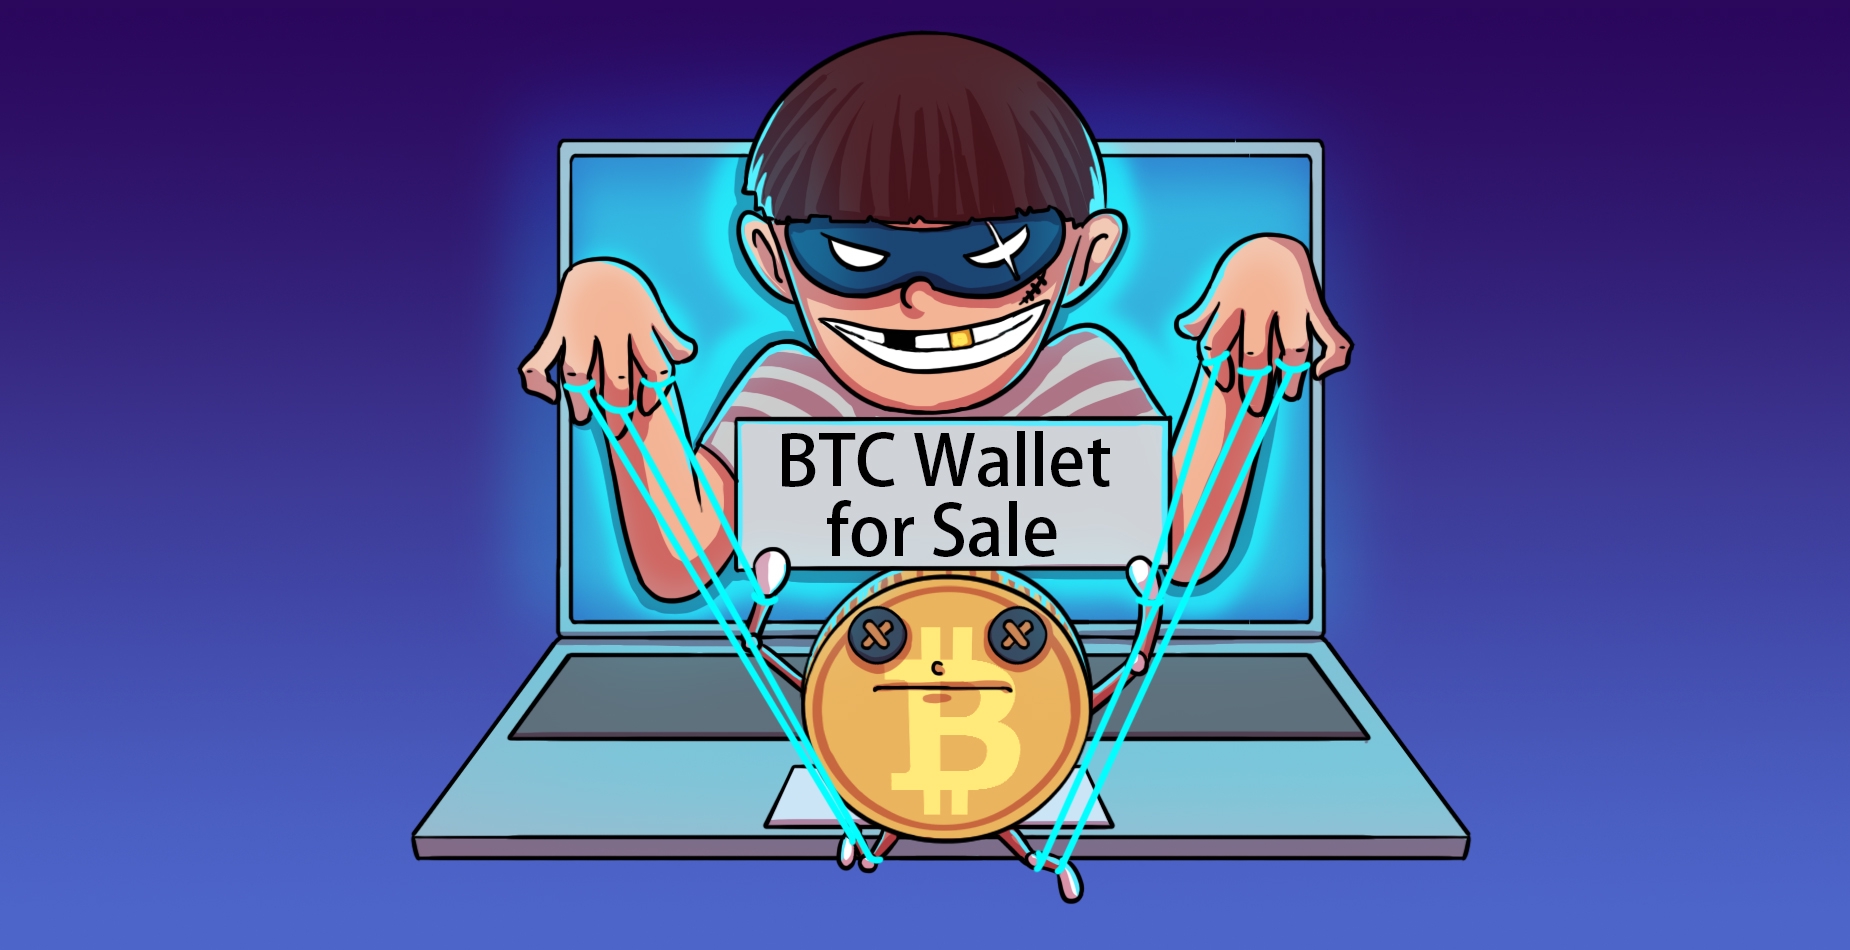 A criminal with a bitcoin as a puppet, holding a sign which states:"Wallet for sale".